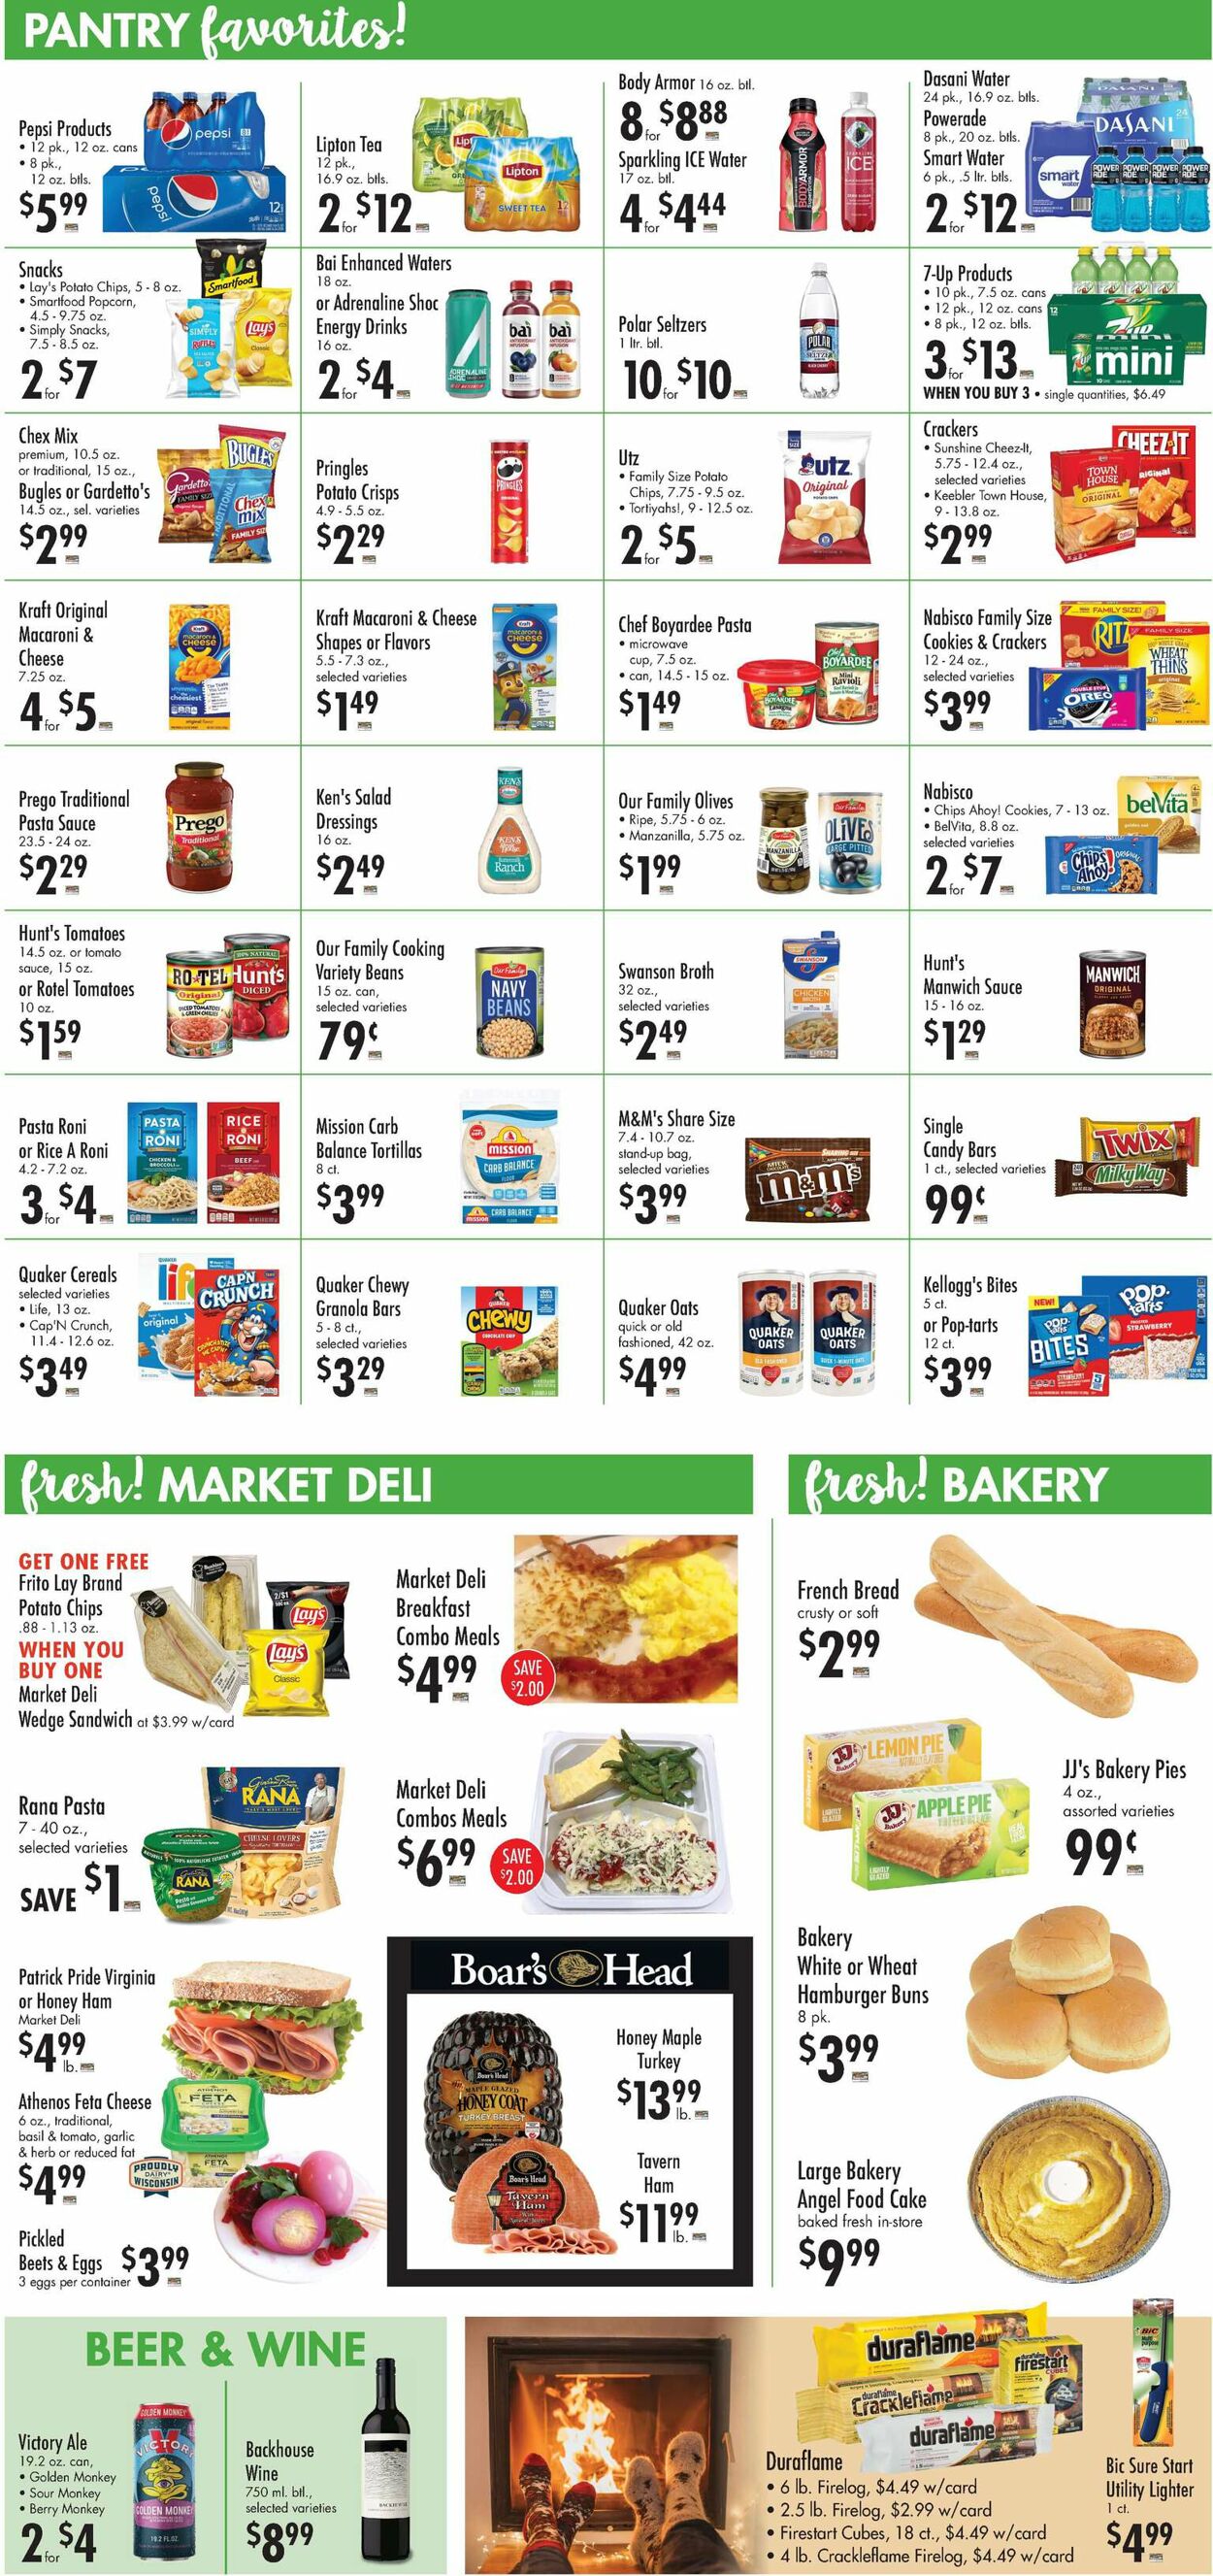 Catalogue Buehler's Fresh Foods from 01/18/2023